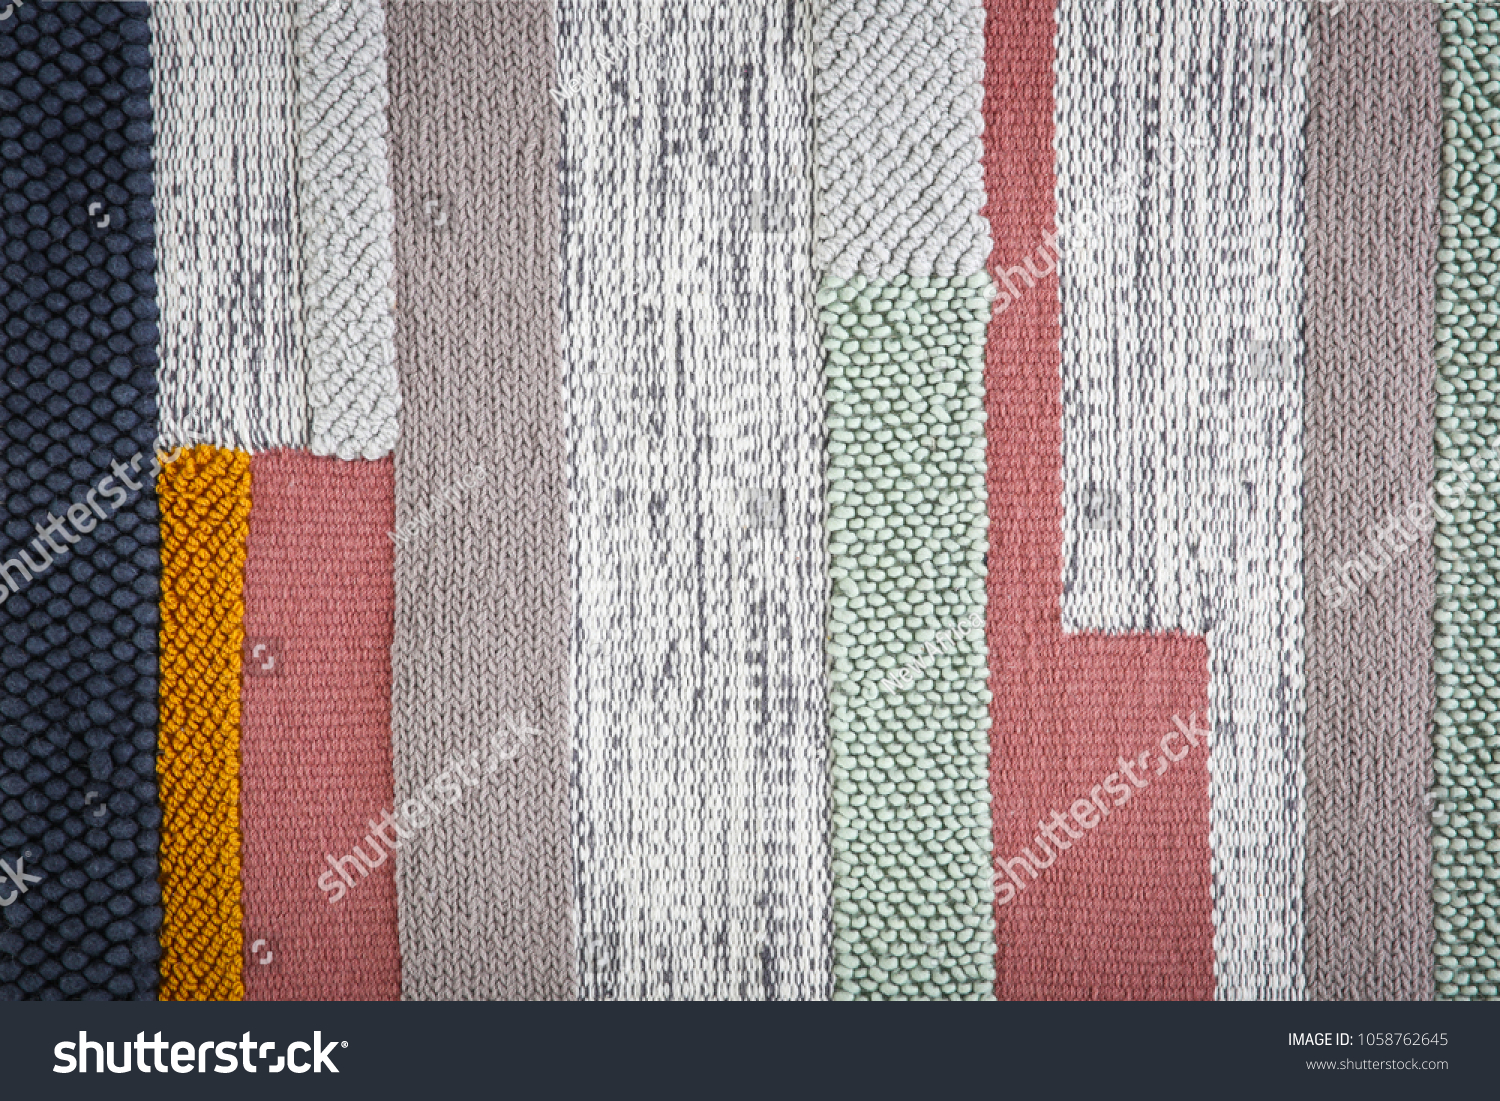 Colorful striped carpet as background #1058762645